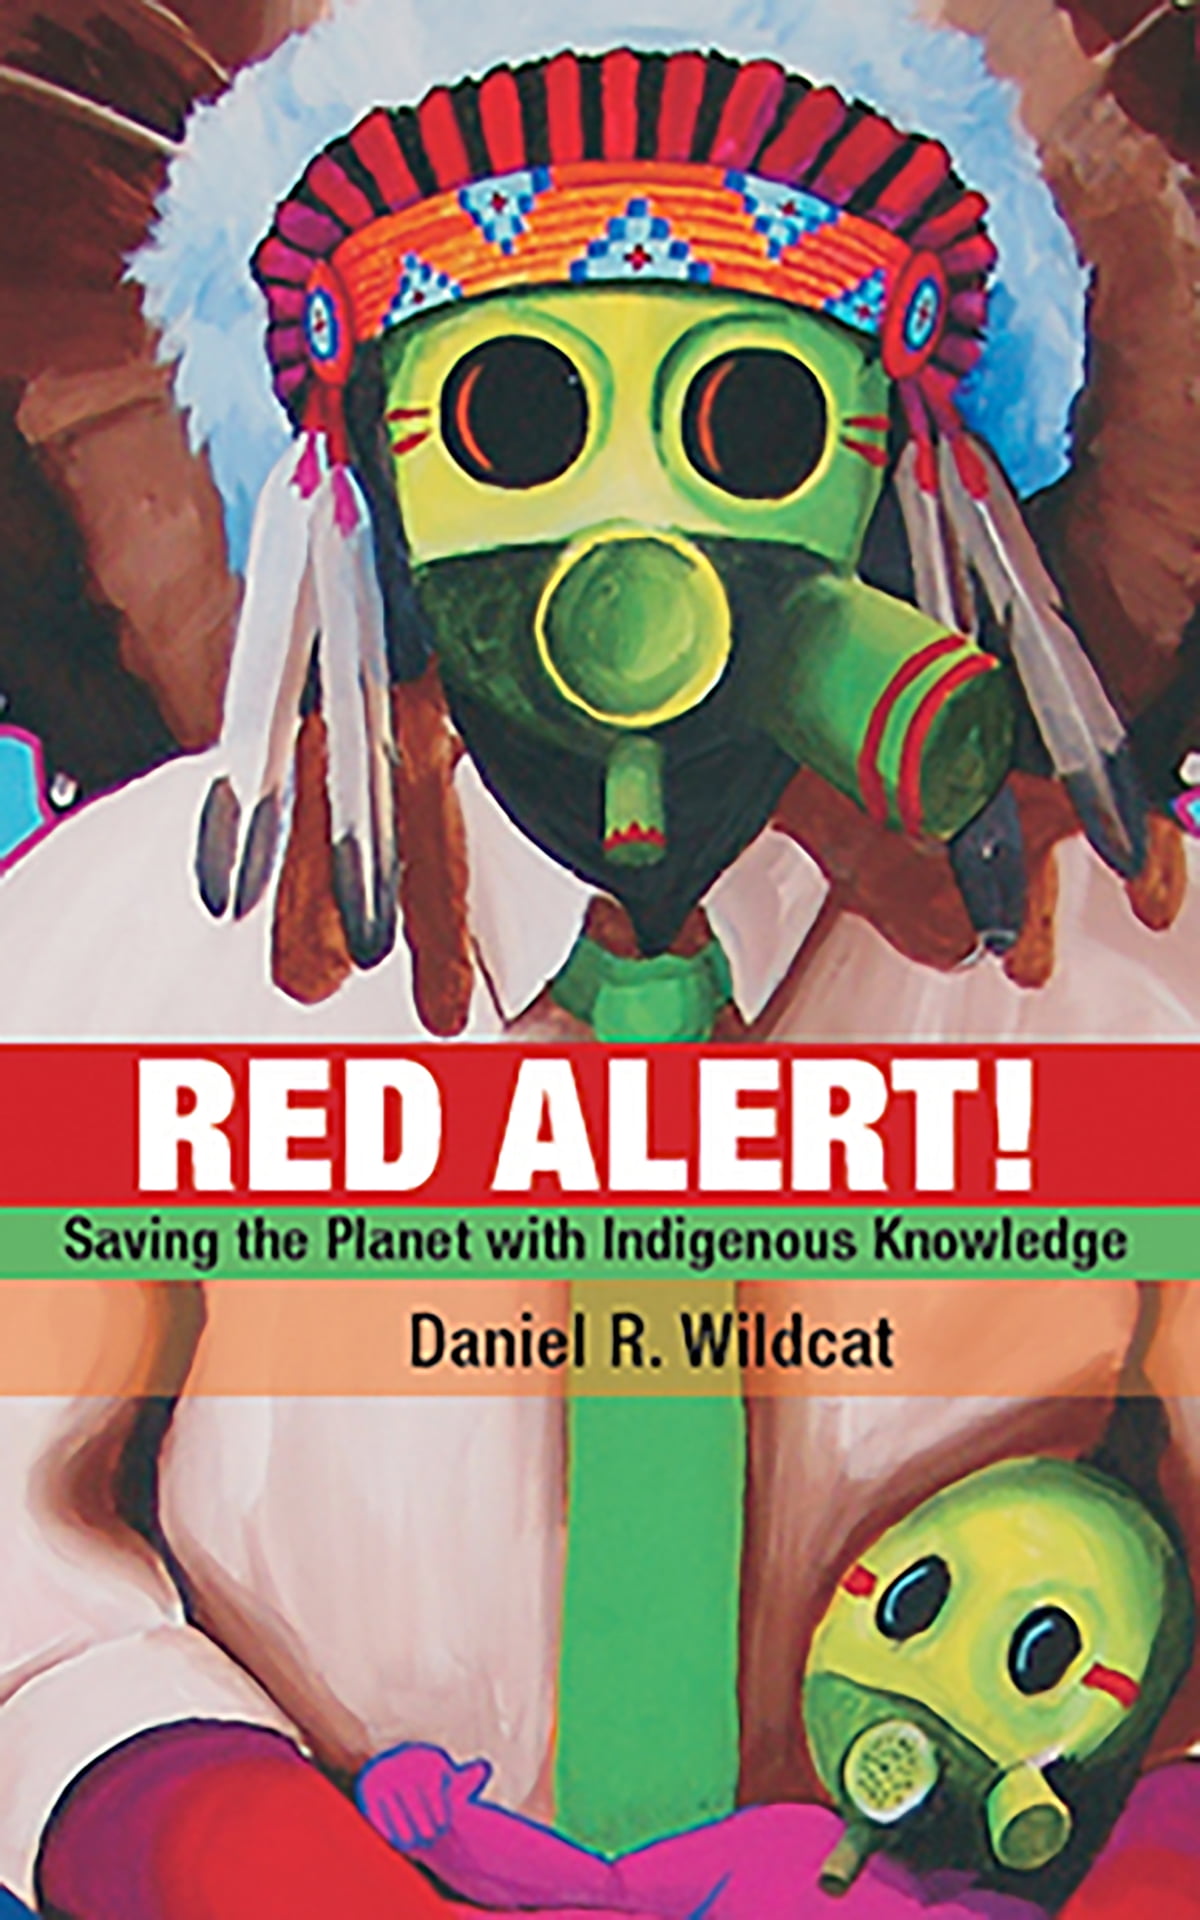 Red Alert! (2010, ReadHowYouWant.com, Limited)